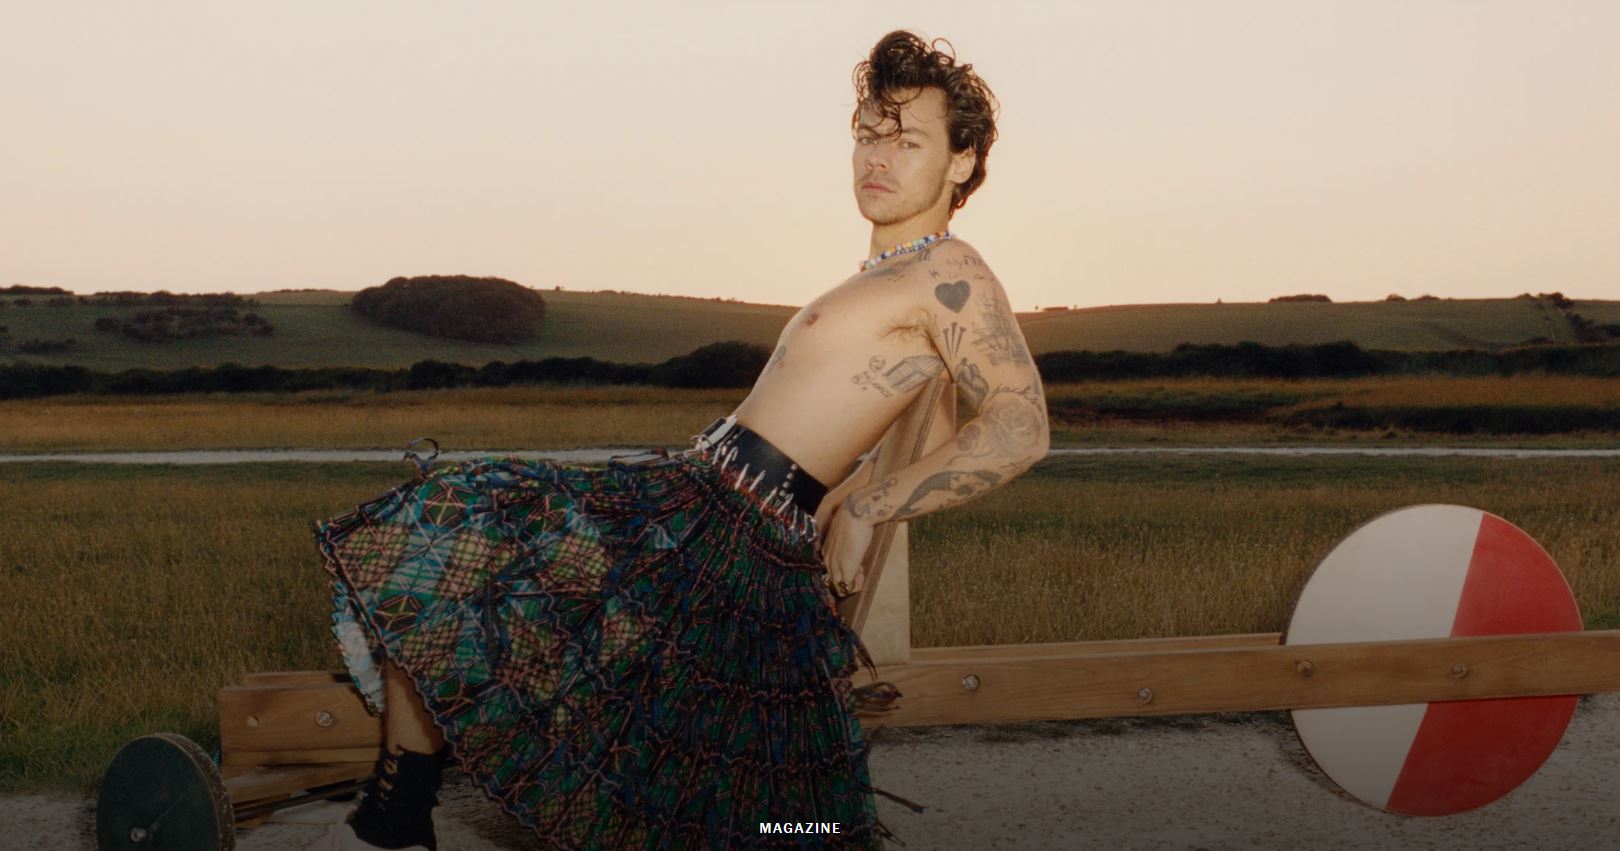 Harry Styles, in women's clothes, is on the cover of "Vogue" magazine, wearing a dress and skirt ... Photos